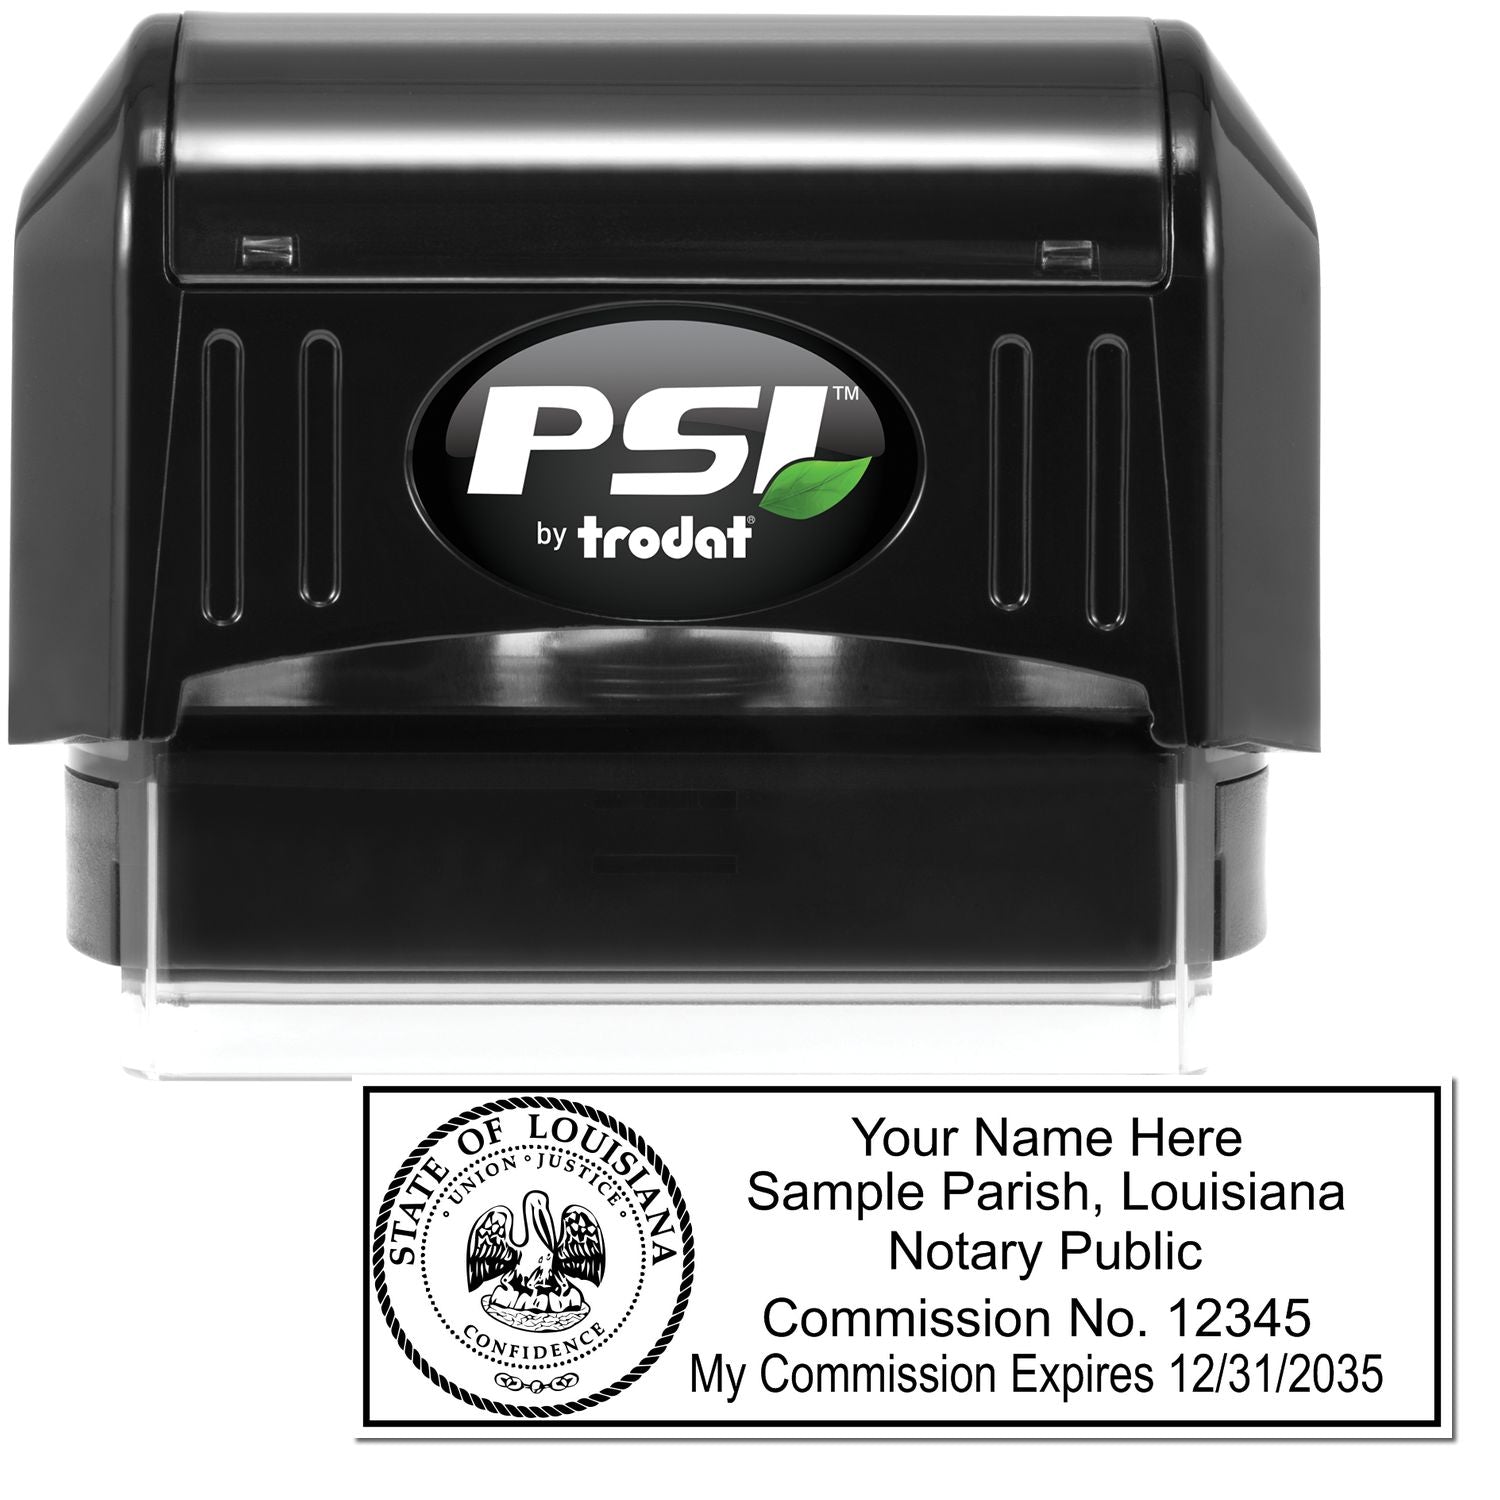 The main image for the PSI Louisiana Notary Stamp depicting a sample of the imprint and electronic files